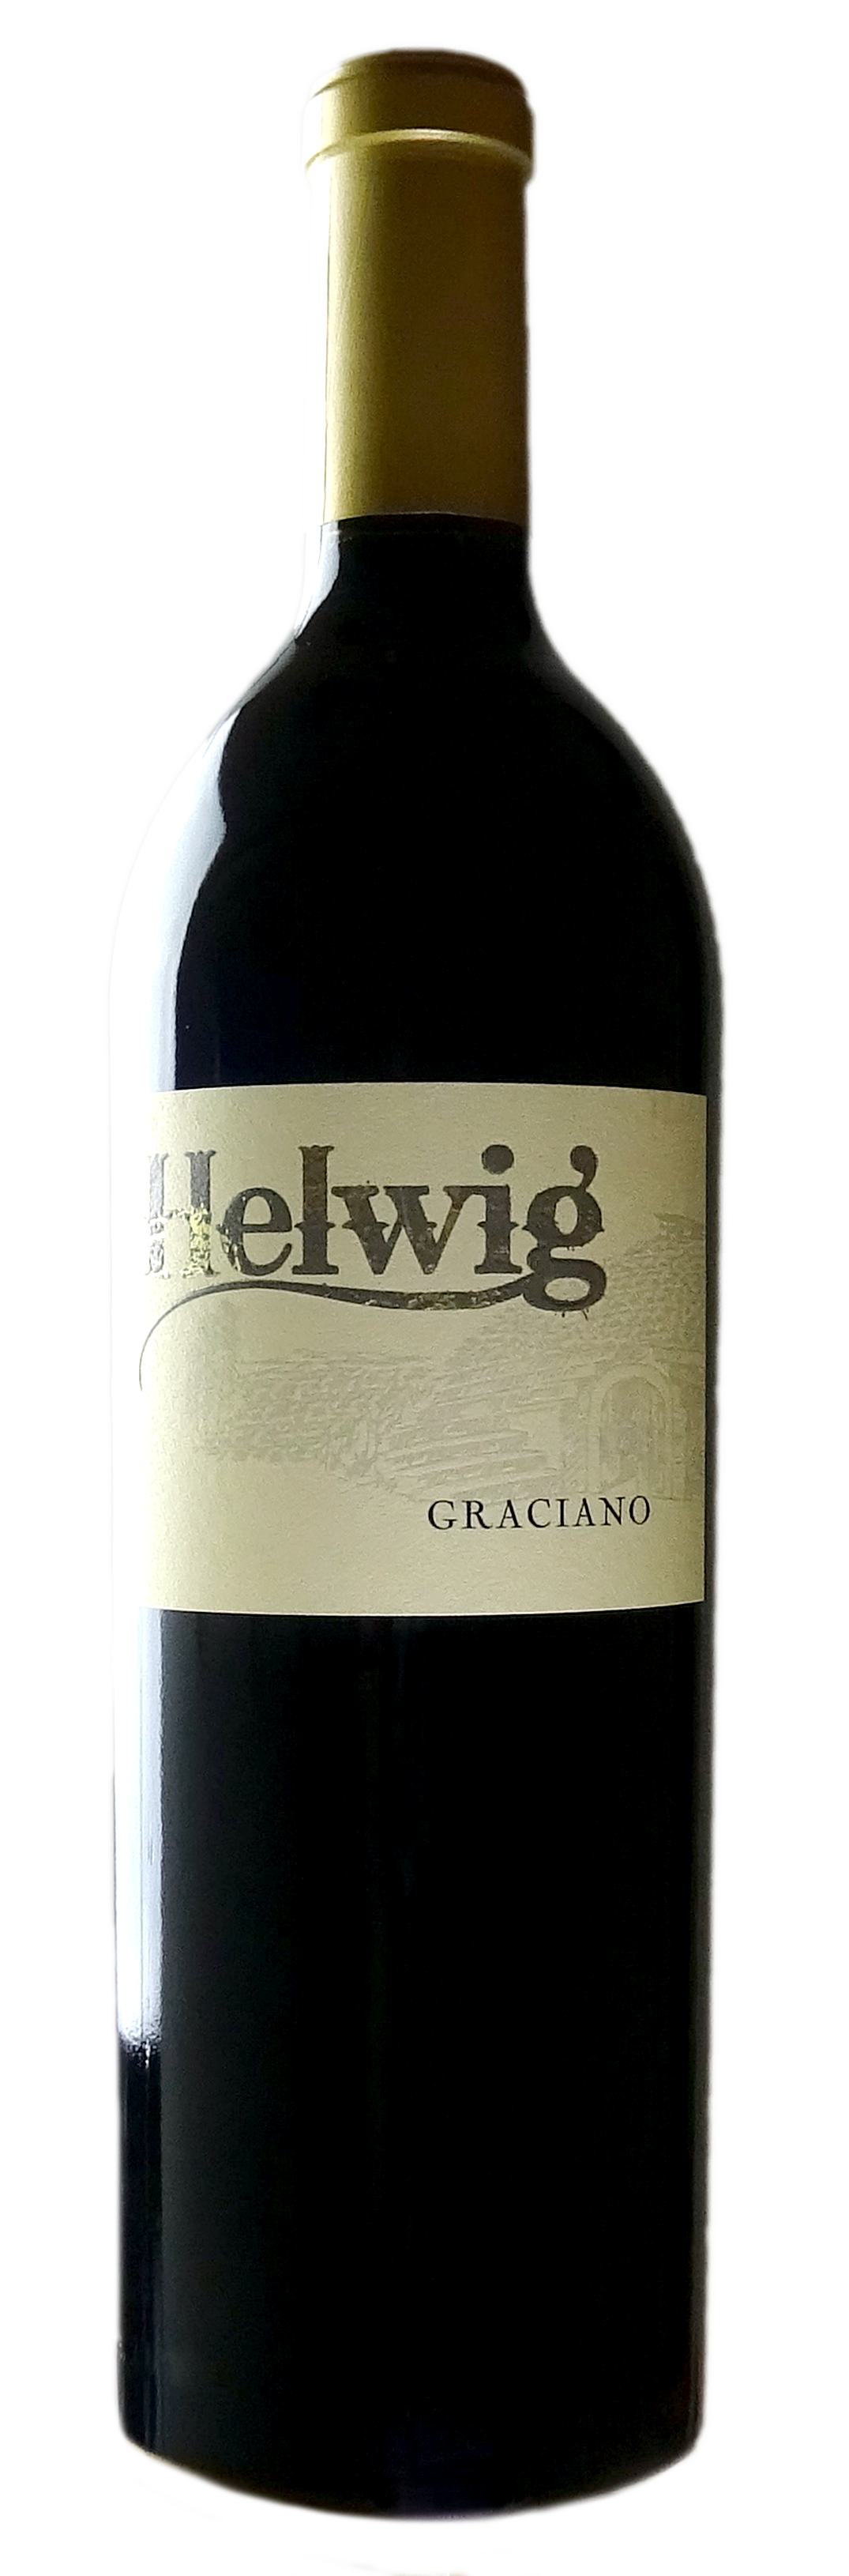 Product Image for Graciano '17